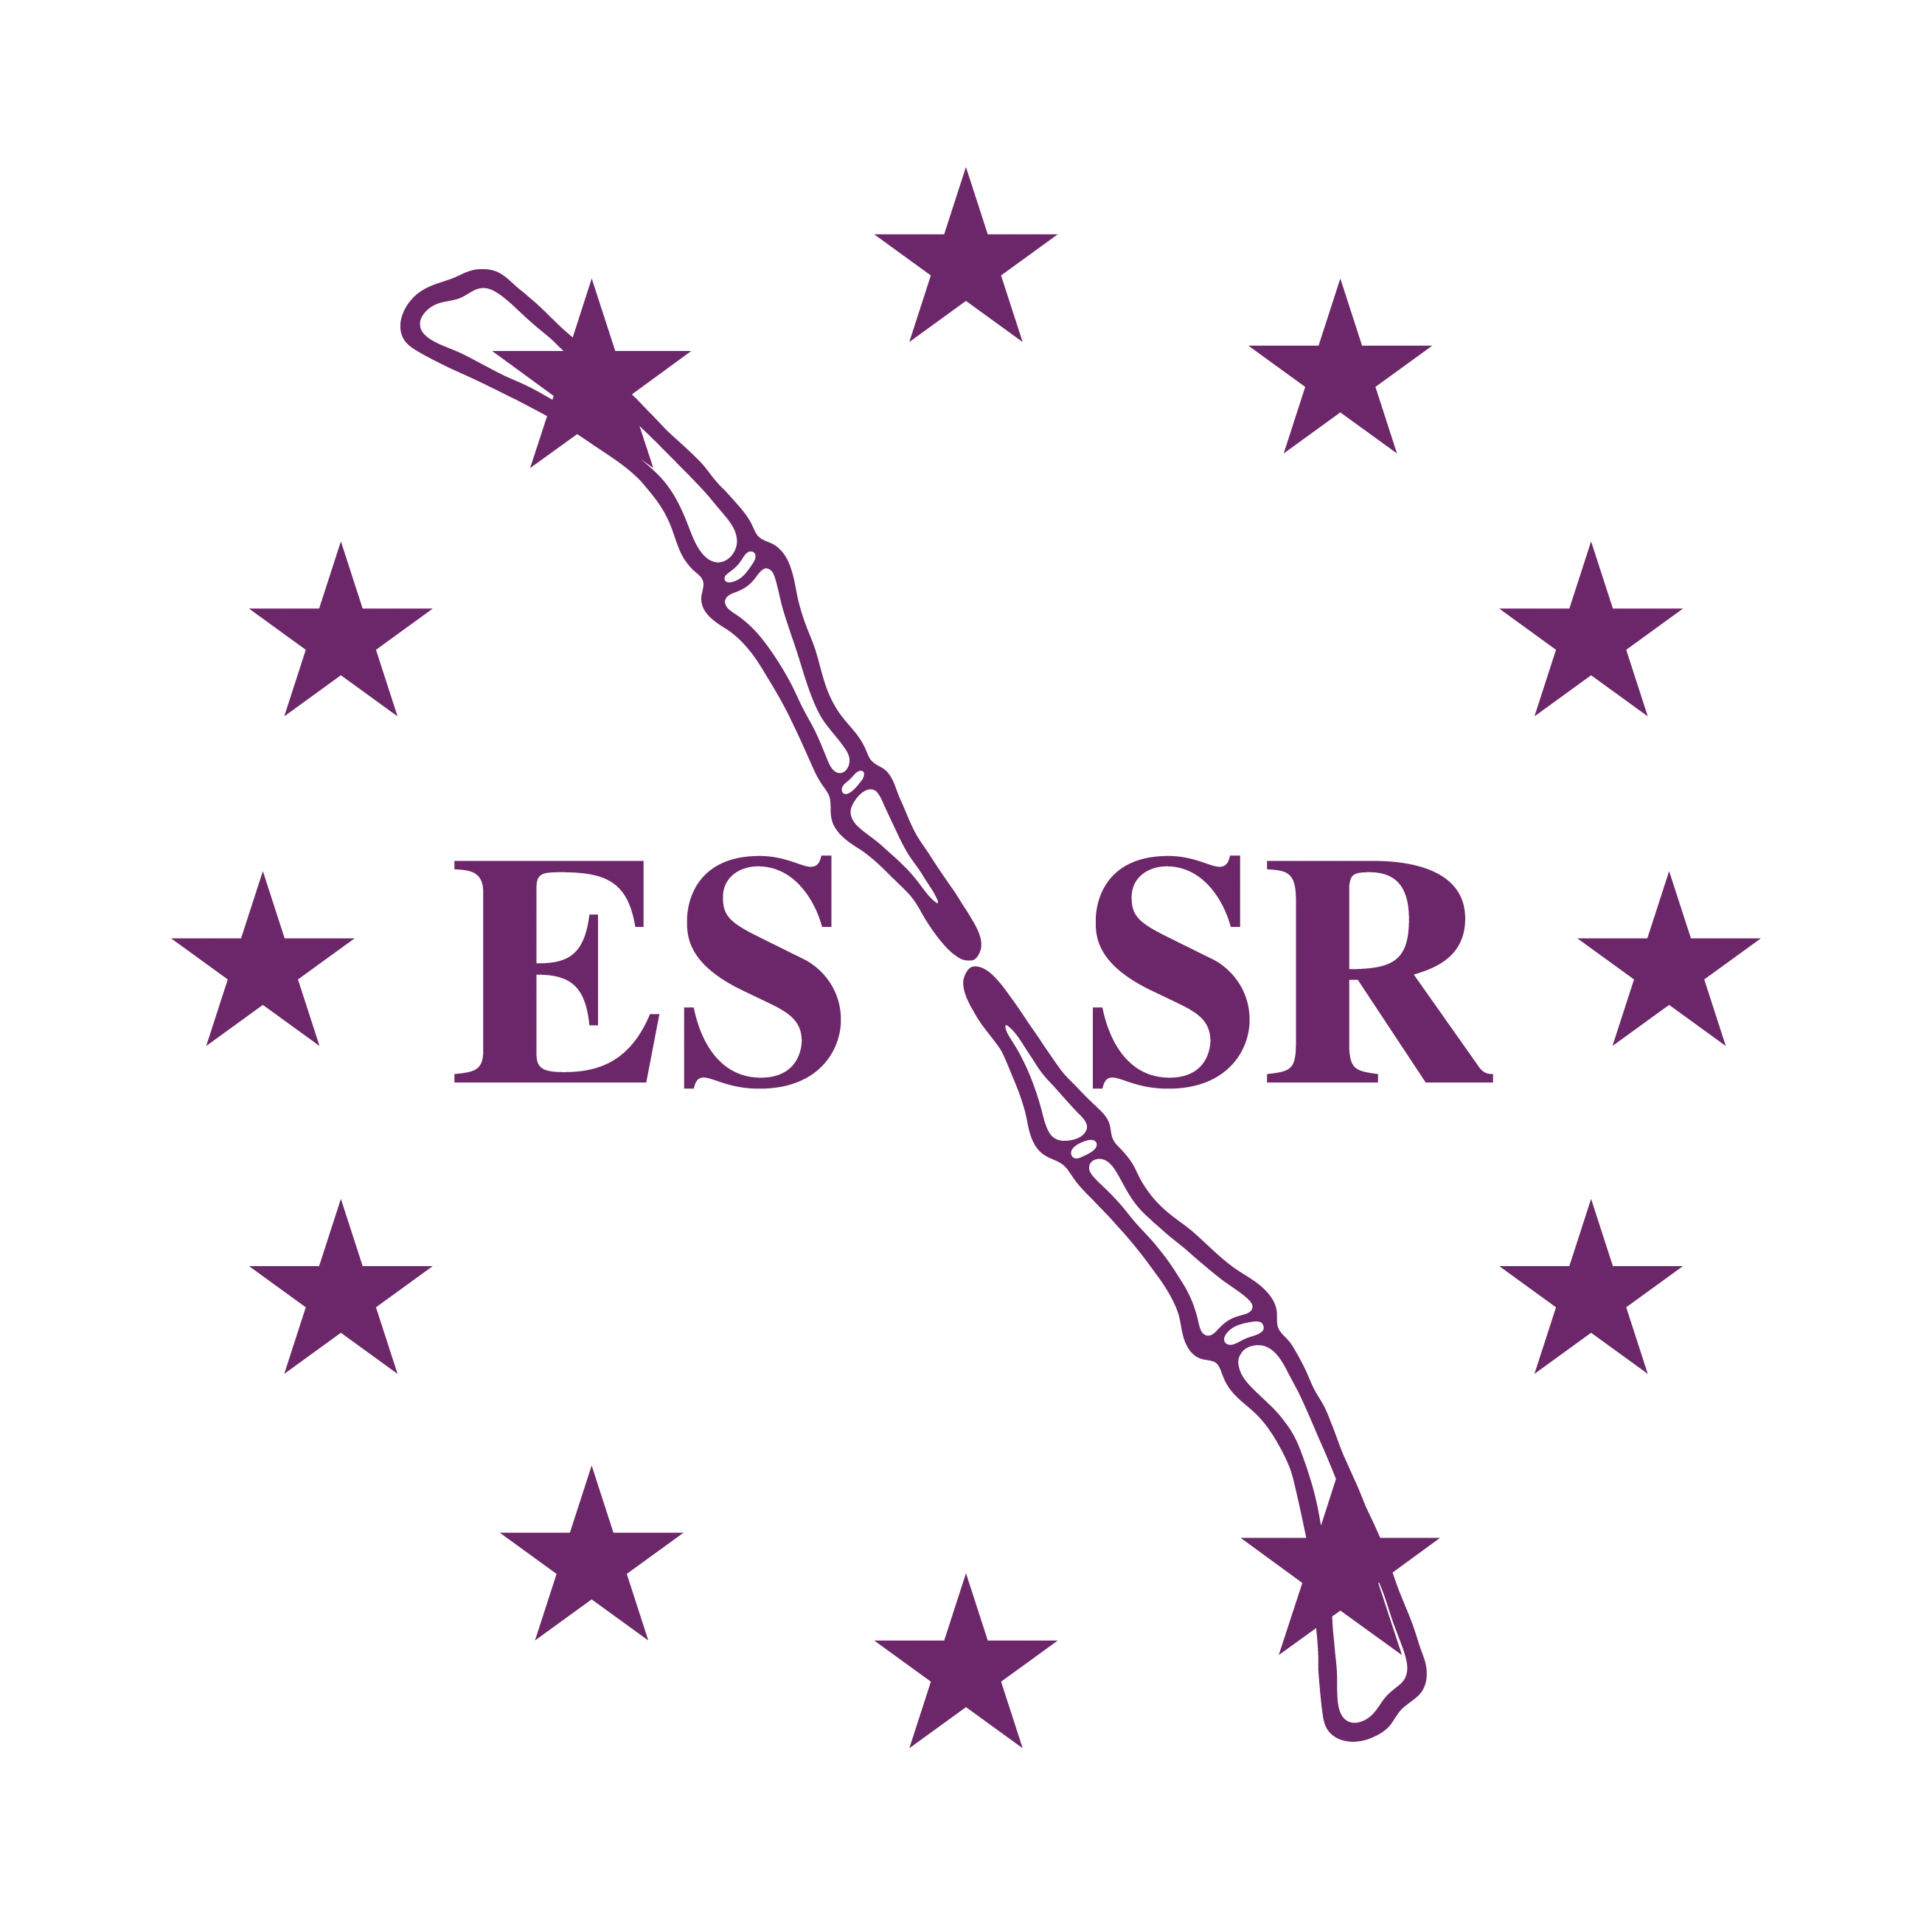 ESSR 2018 - Annual Scientific Meeting of The European Society of Musculoskeletal Radiology